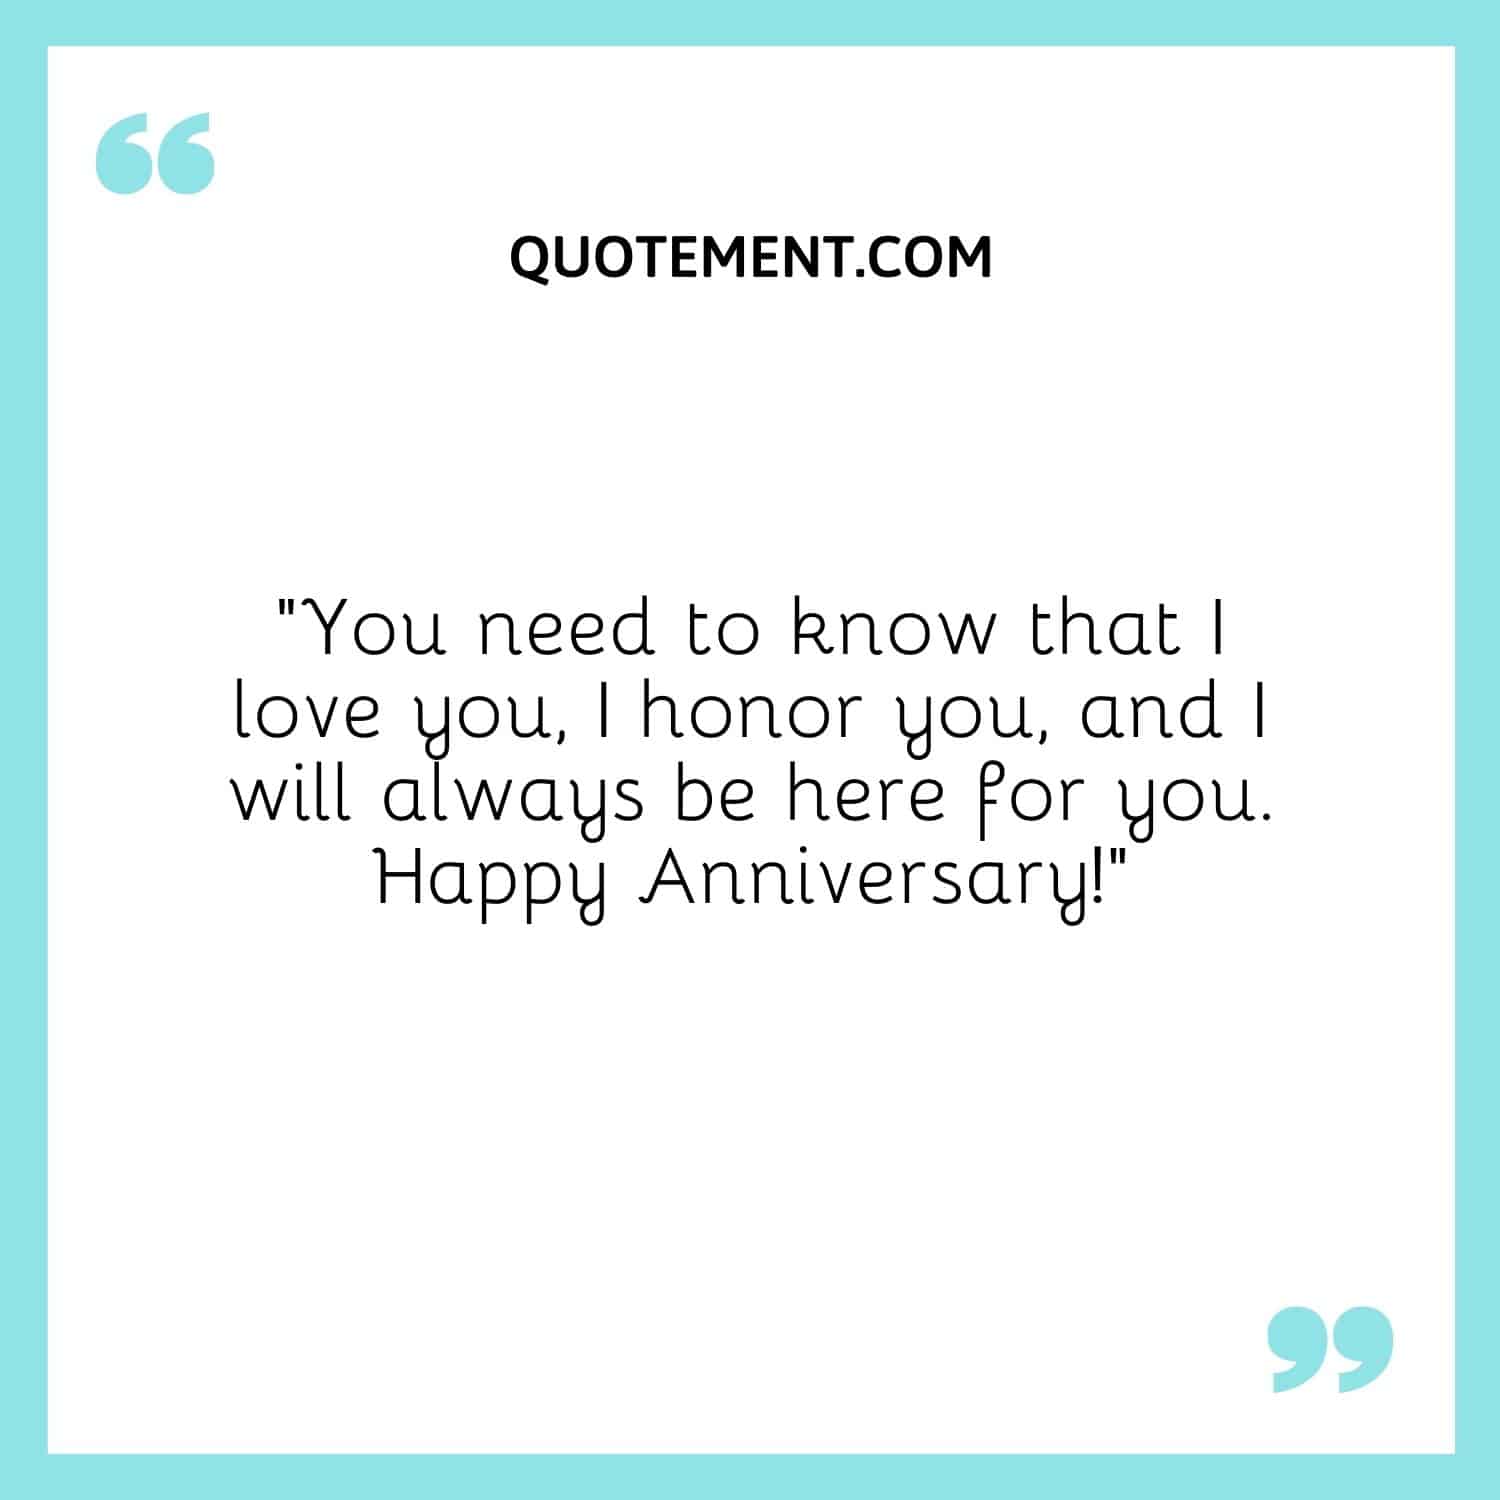 “You need to know that I love you, I honor you, and I will always be here for you. Happy Anniversary!”